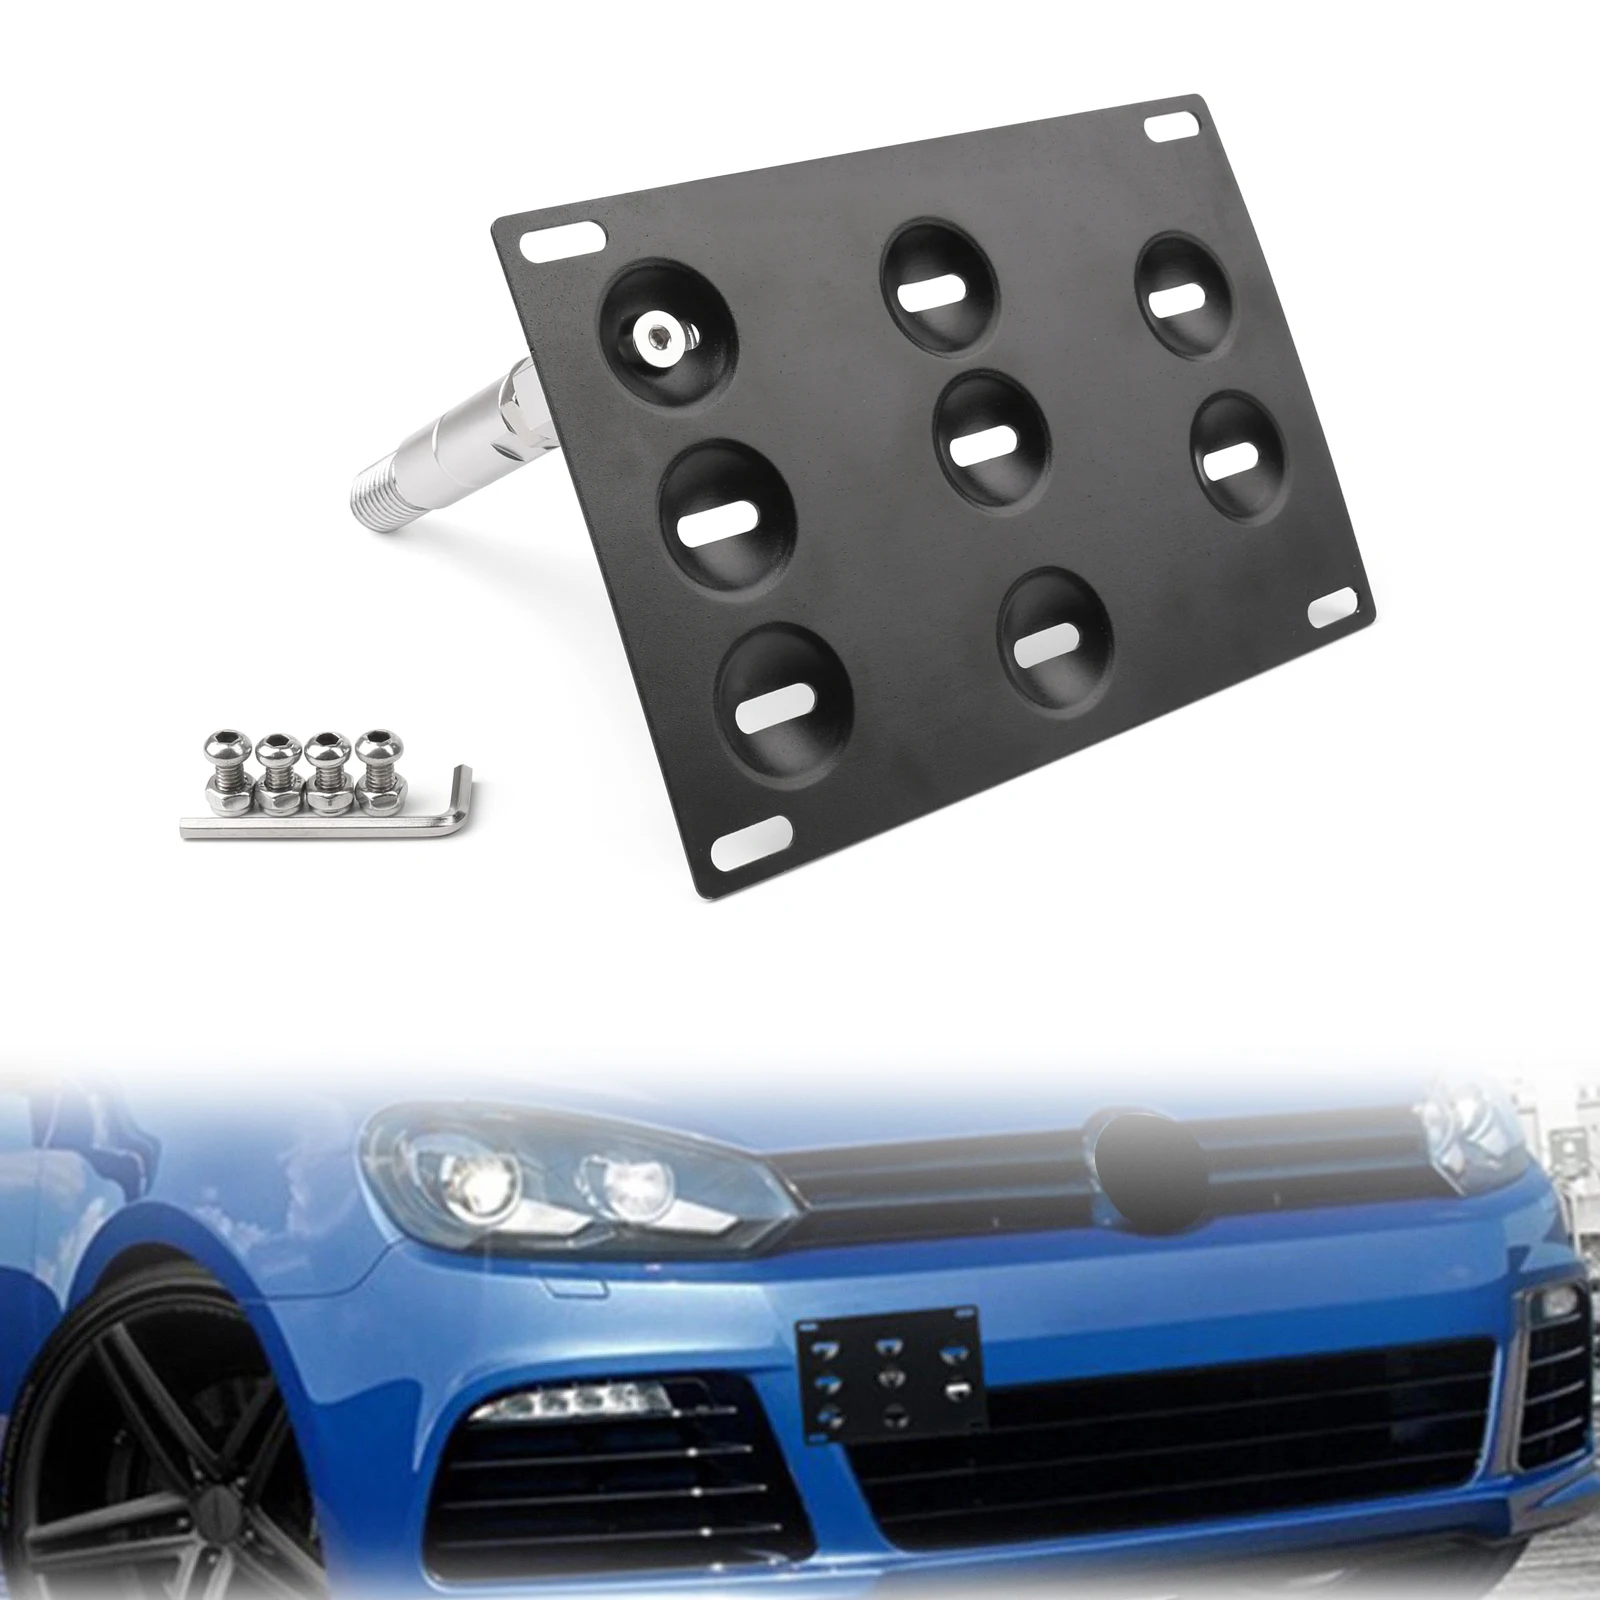 Topteng Front Bumper Tow Hook License Plate Mounting Holder Bracket For VW Golf